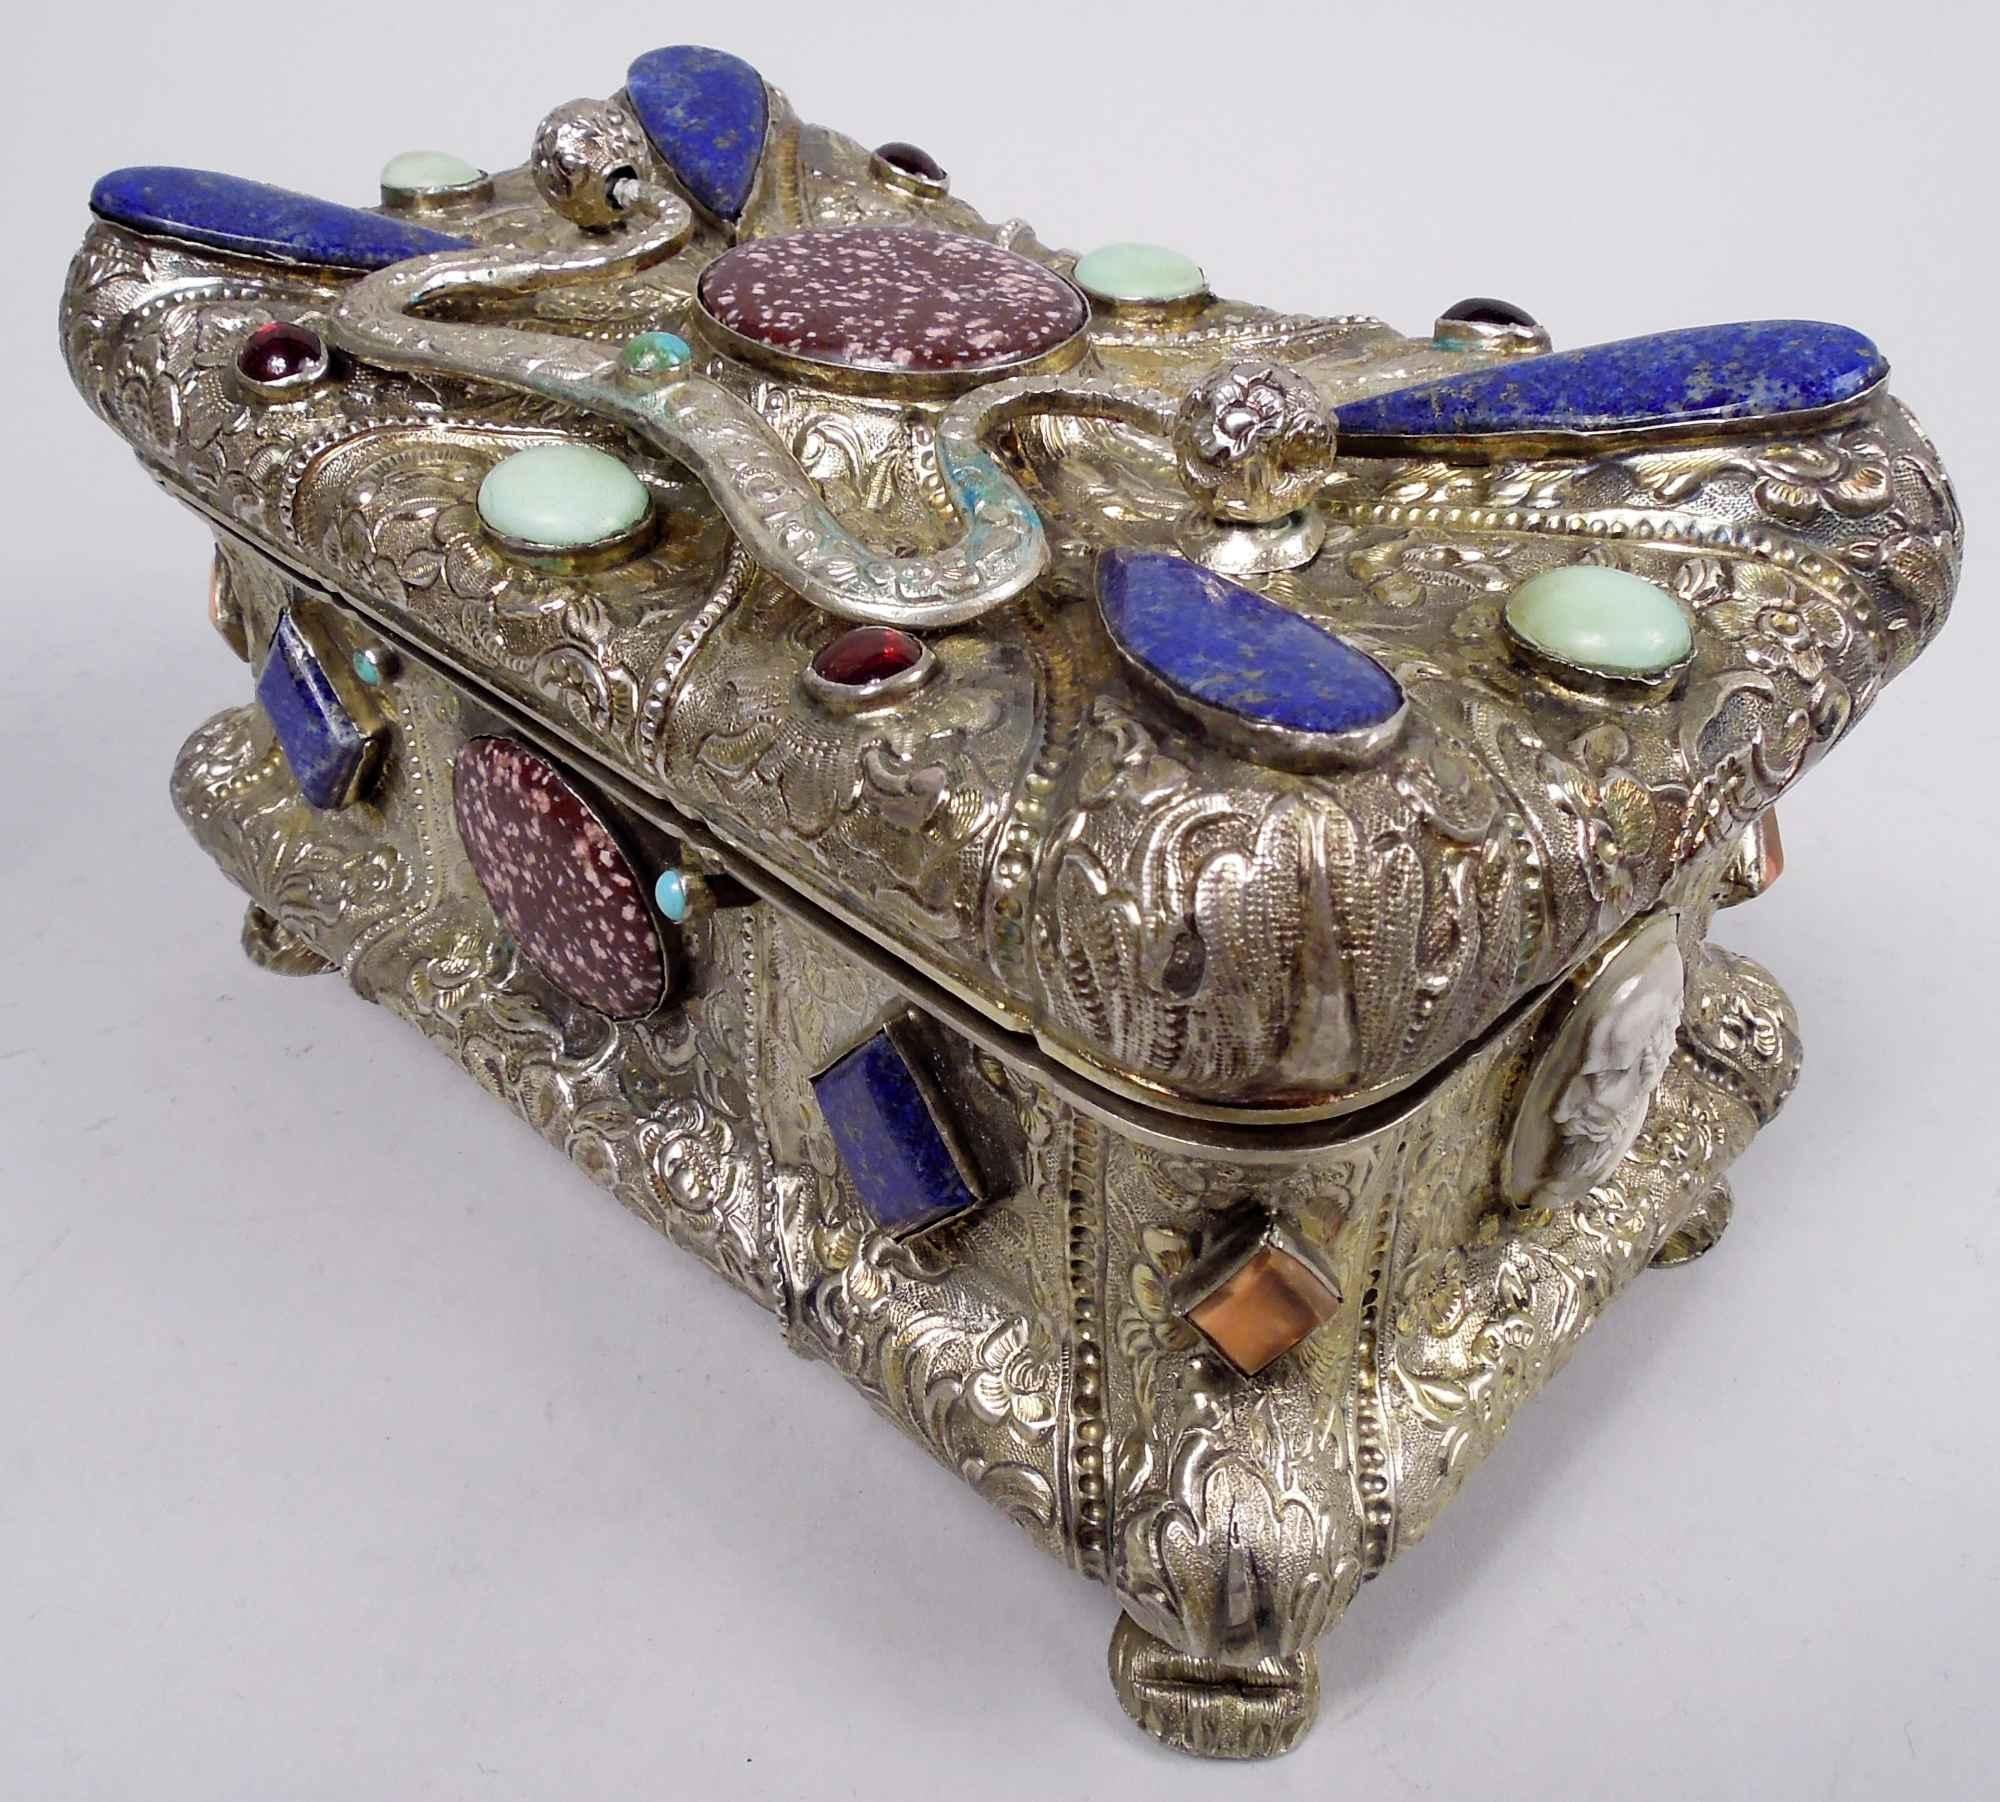 Austrian Biedermeier silver gilt casket, 1846. Bellied, lobed, and rectangular. Hinged cover same and concave with raised center and swing-mounted scroll bracket cast handle with flowers. Hardstone mounts including porphyry and lapis lazuli as well